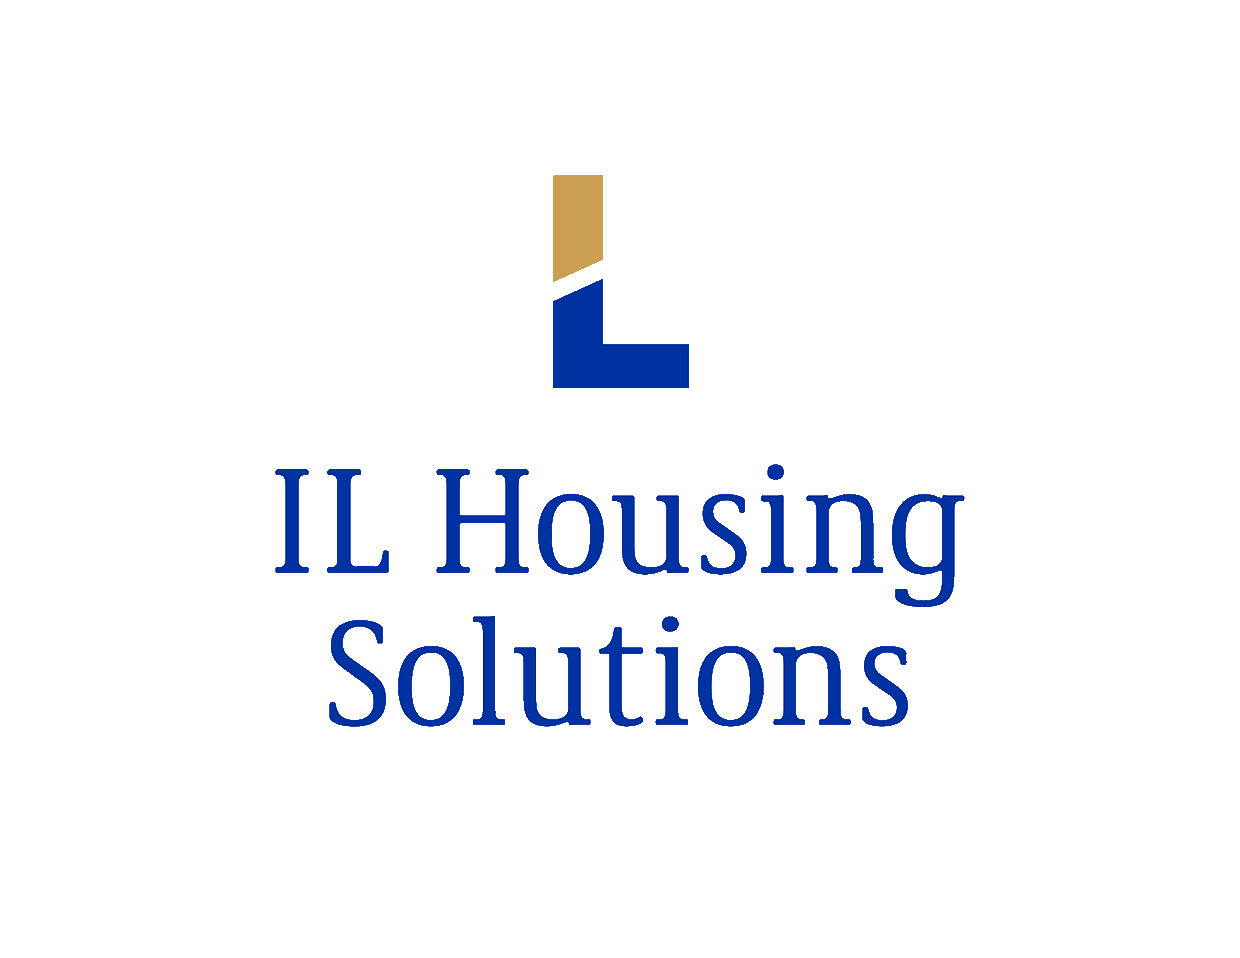 IL Housing Solutions